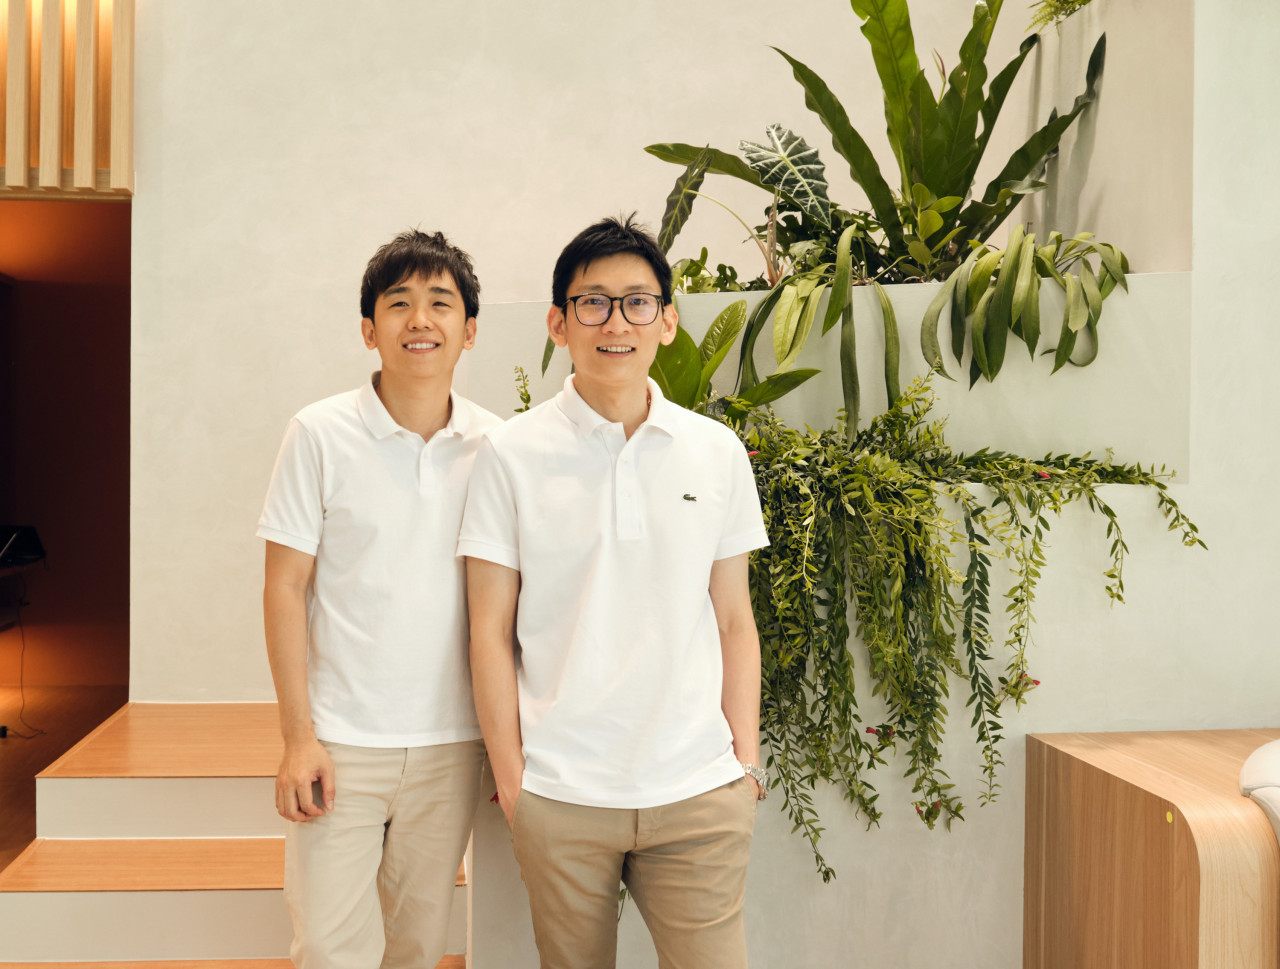 Signature market co-founders John Cheng (left) and Edwin Wang. – Pic courtesy of See Cafe